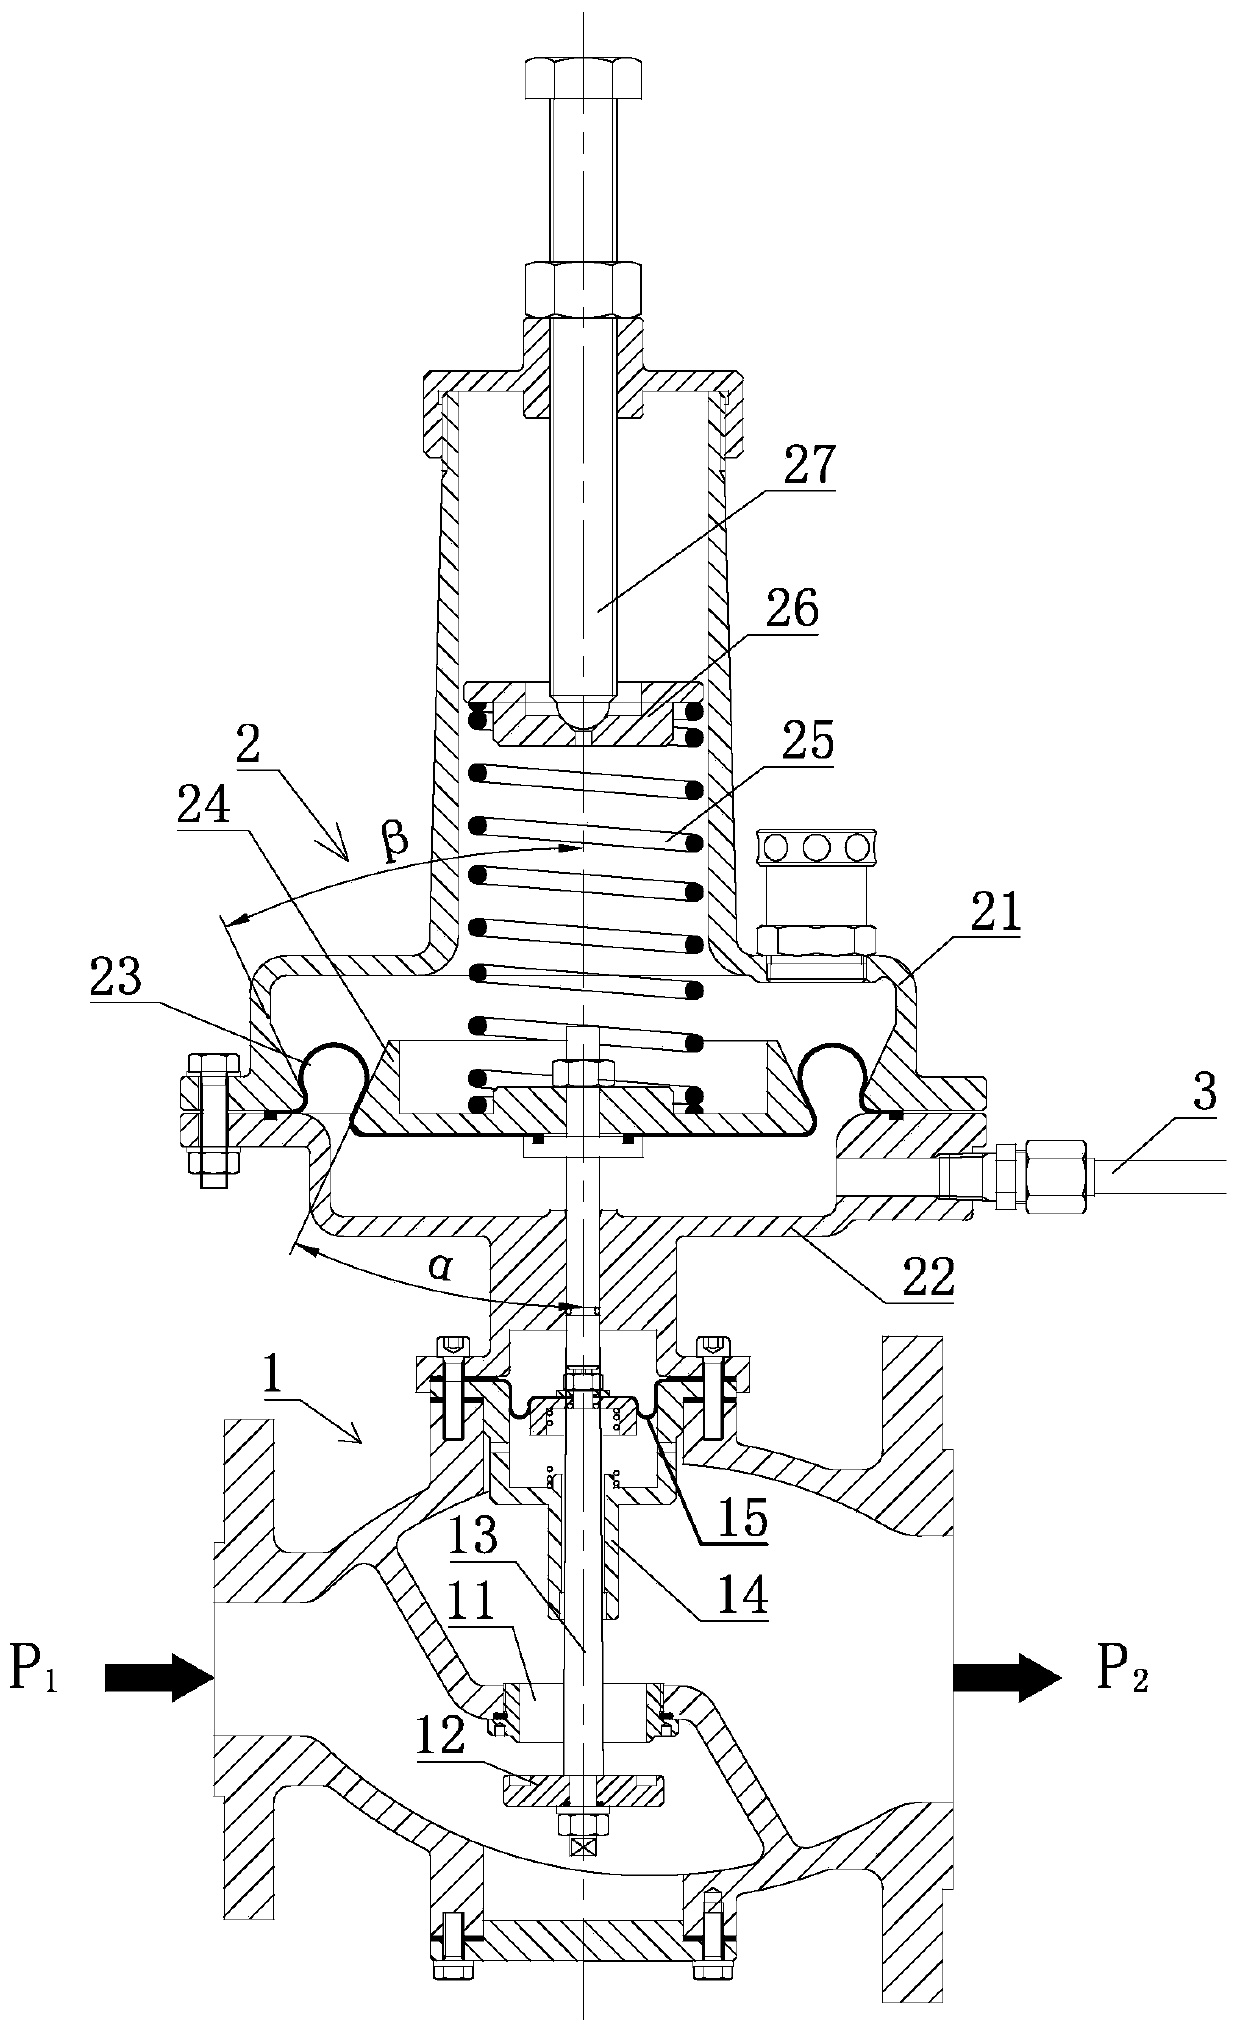 Direct-acting type pressure regulator for compensating for spring effect